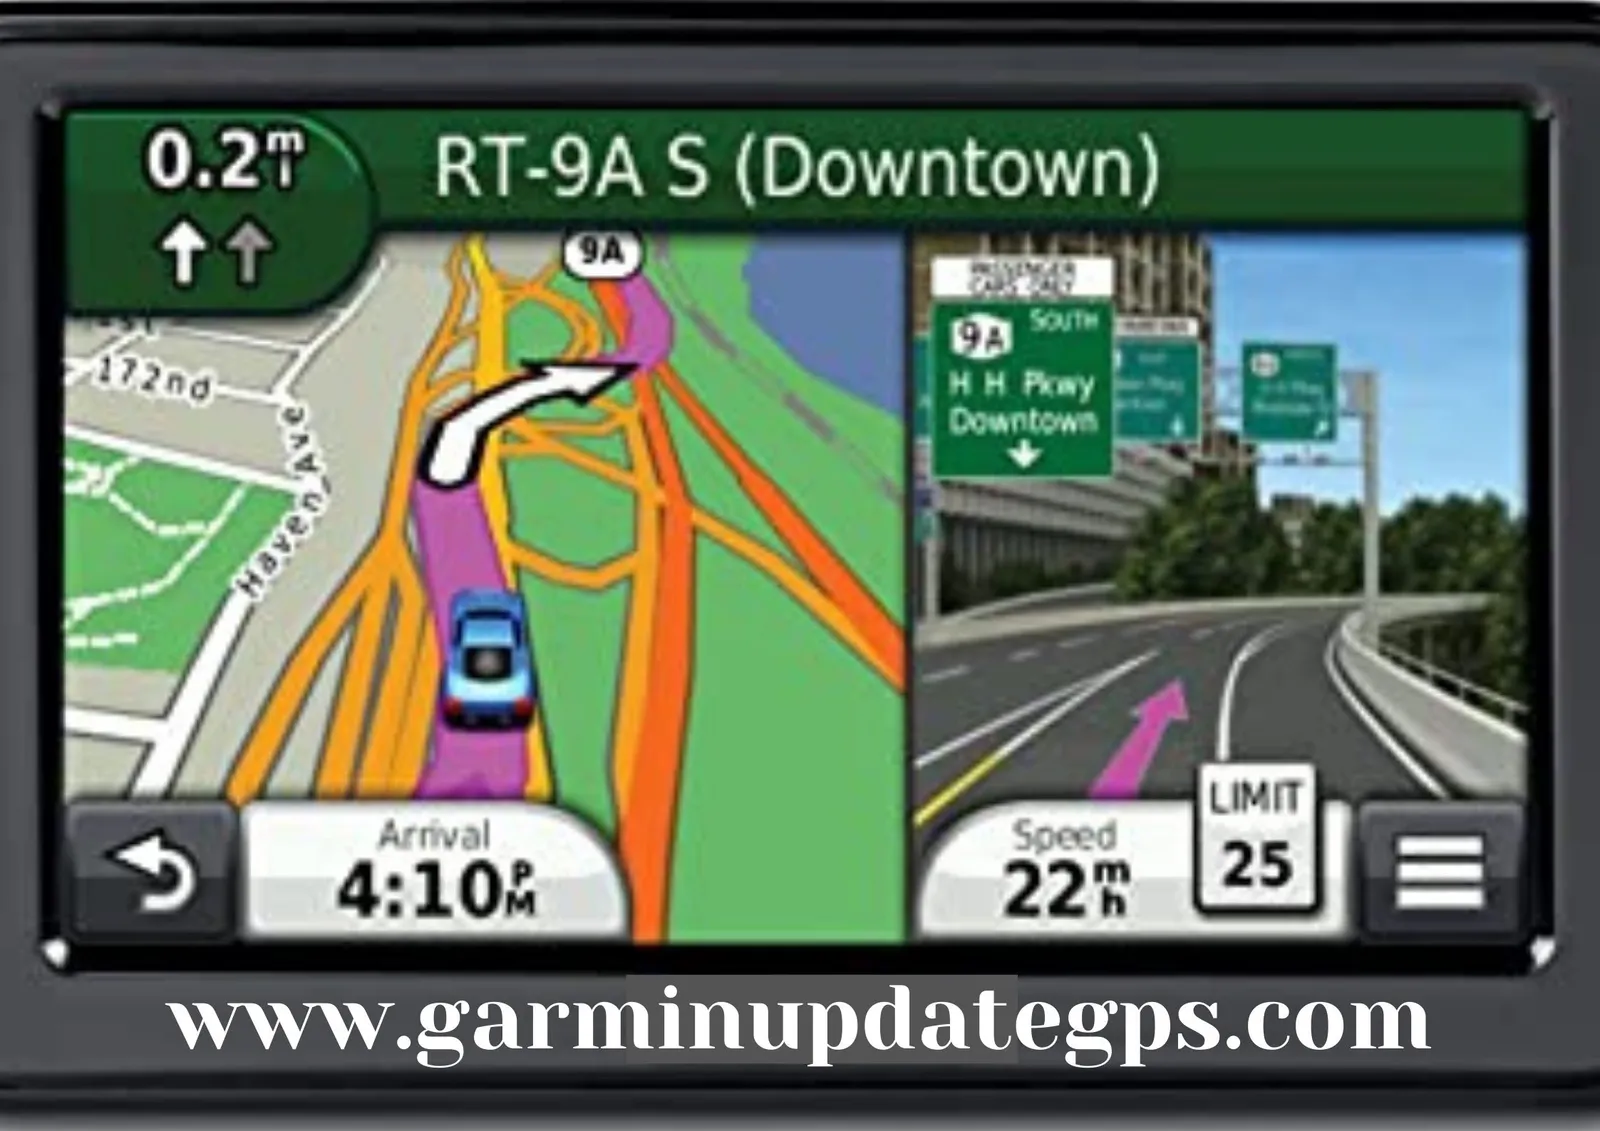 How to connect Garmin Express to your Garmin device?